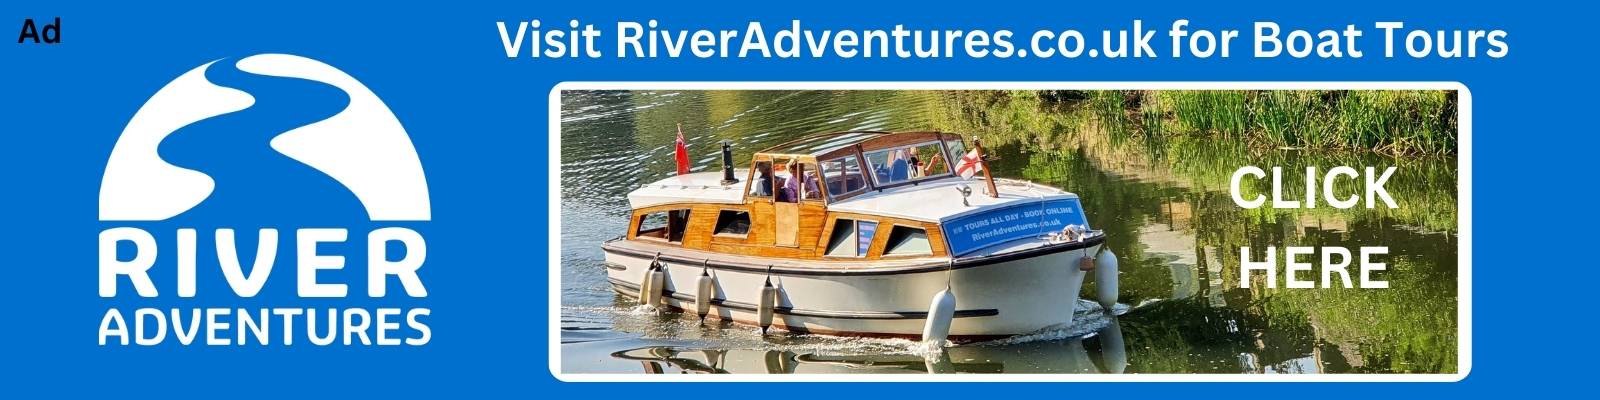 A link to the river adventures website